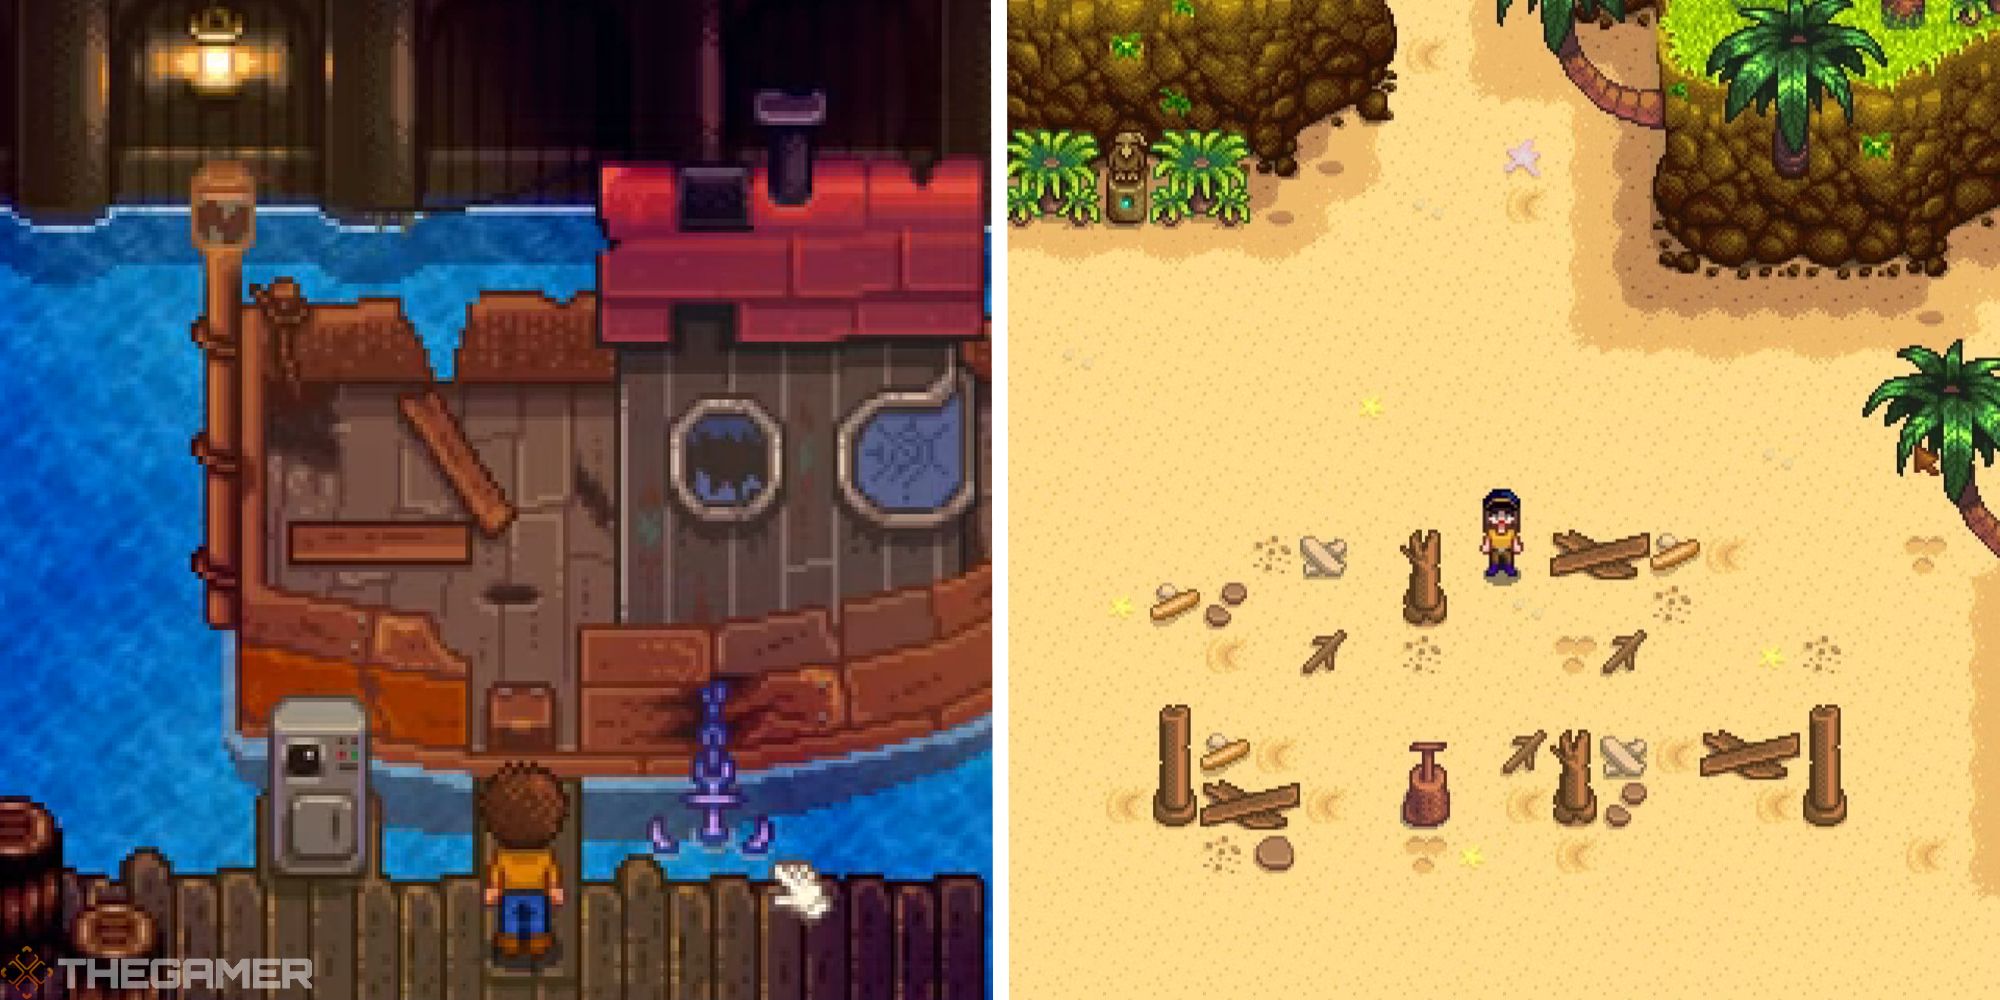 stardew valley split image showing willys boat next to image of player on south beach of ginger island